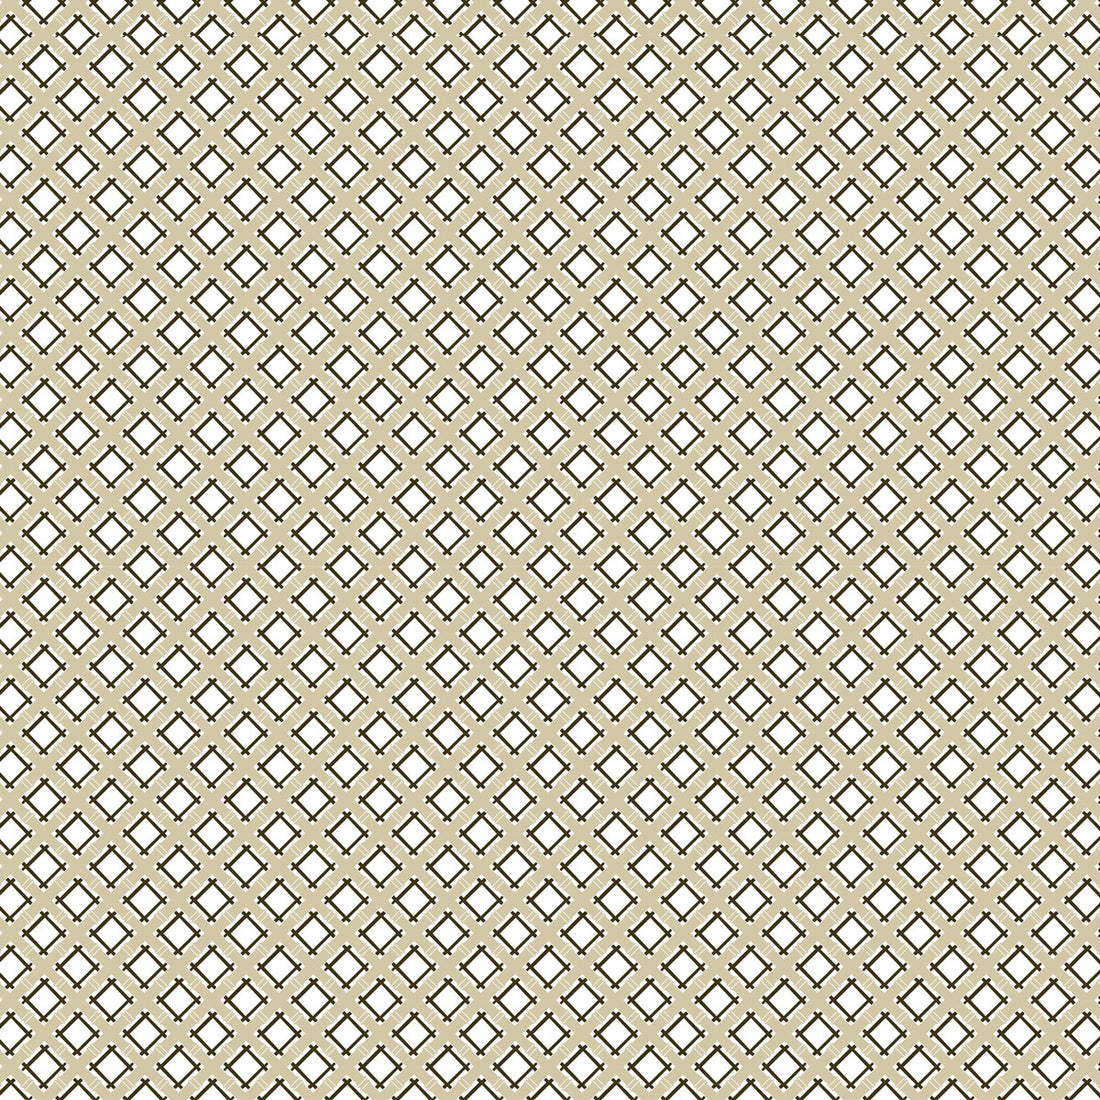 Trellis fabric in beige/negro color - pattern GDT5527.003.0 - by Gaston y Daniela in the Gaston Libreria collection